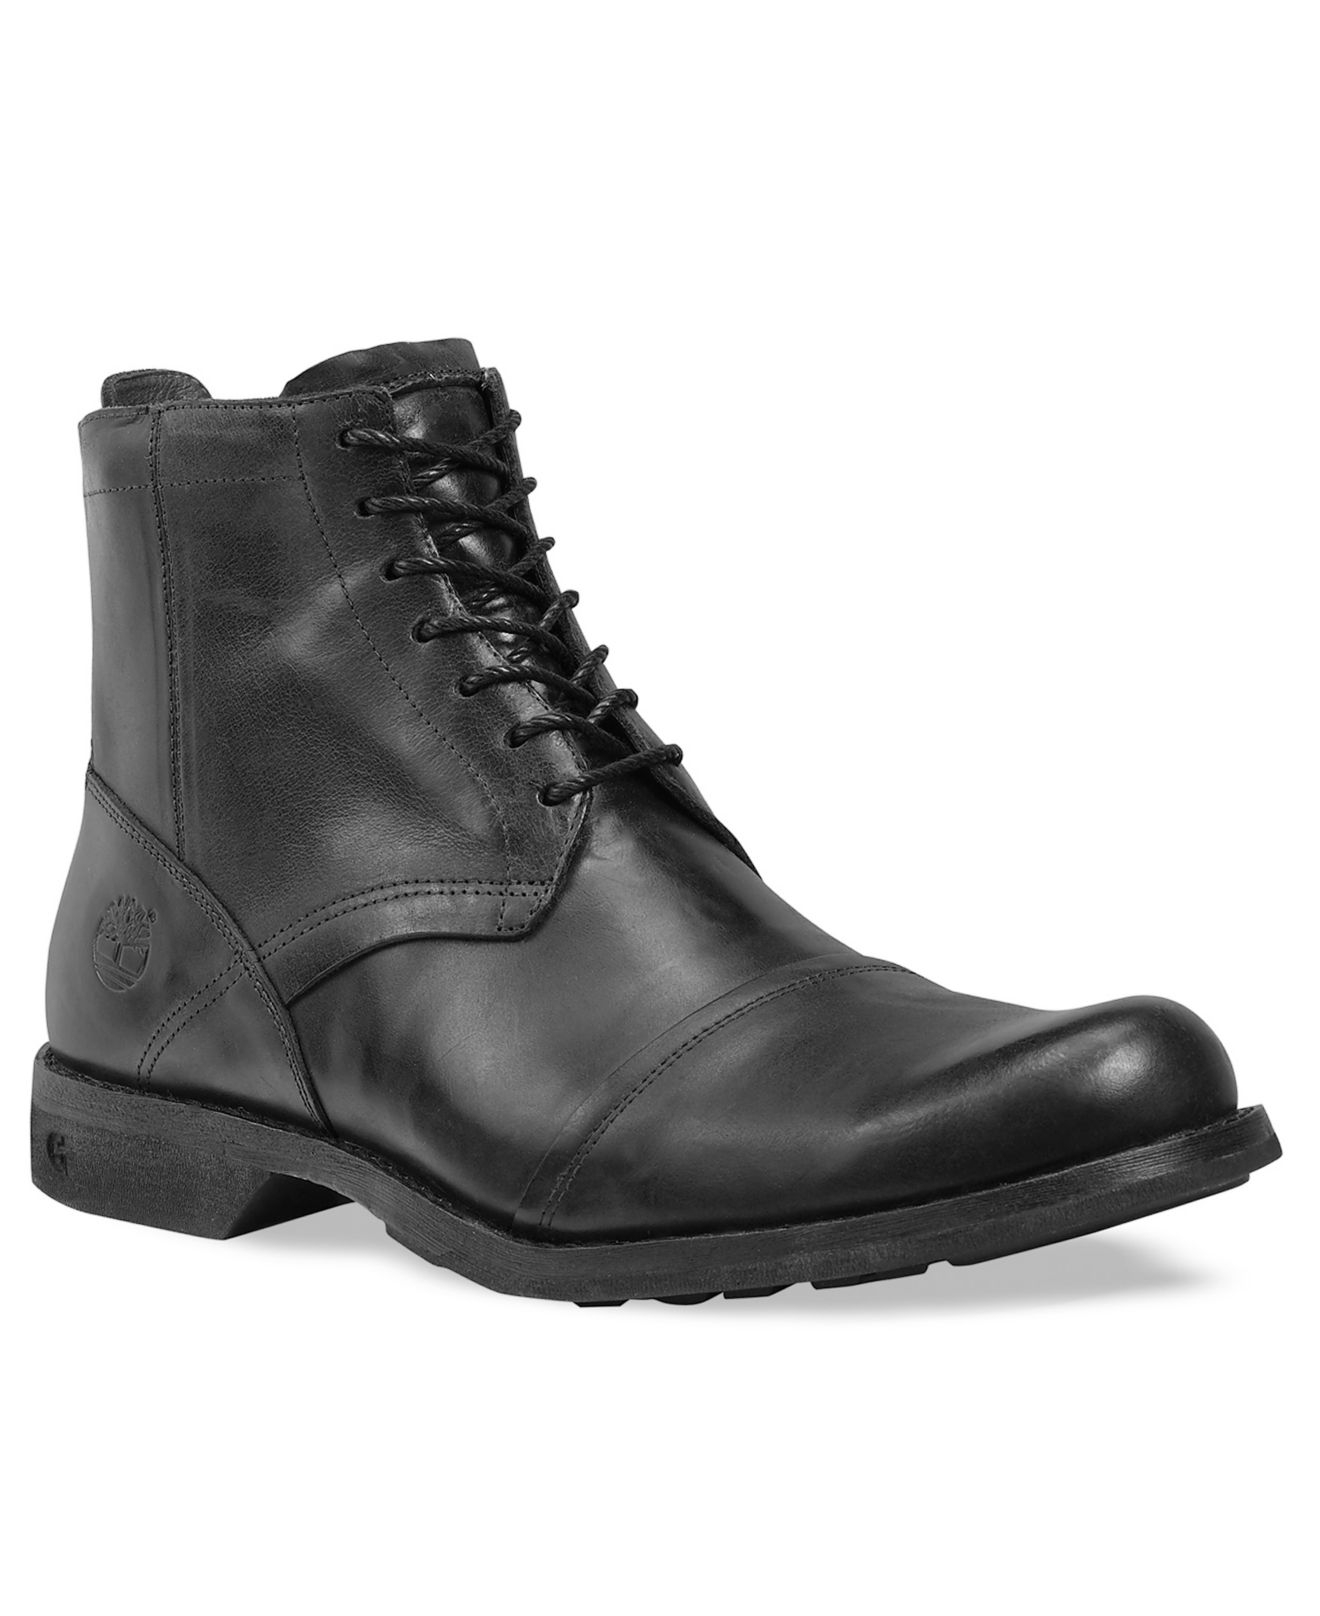 6" Zippered Boots in Black for Men Lyst